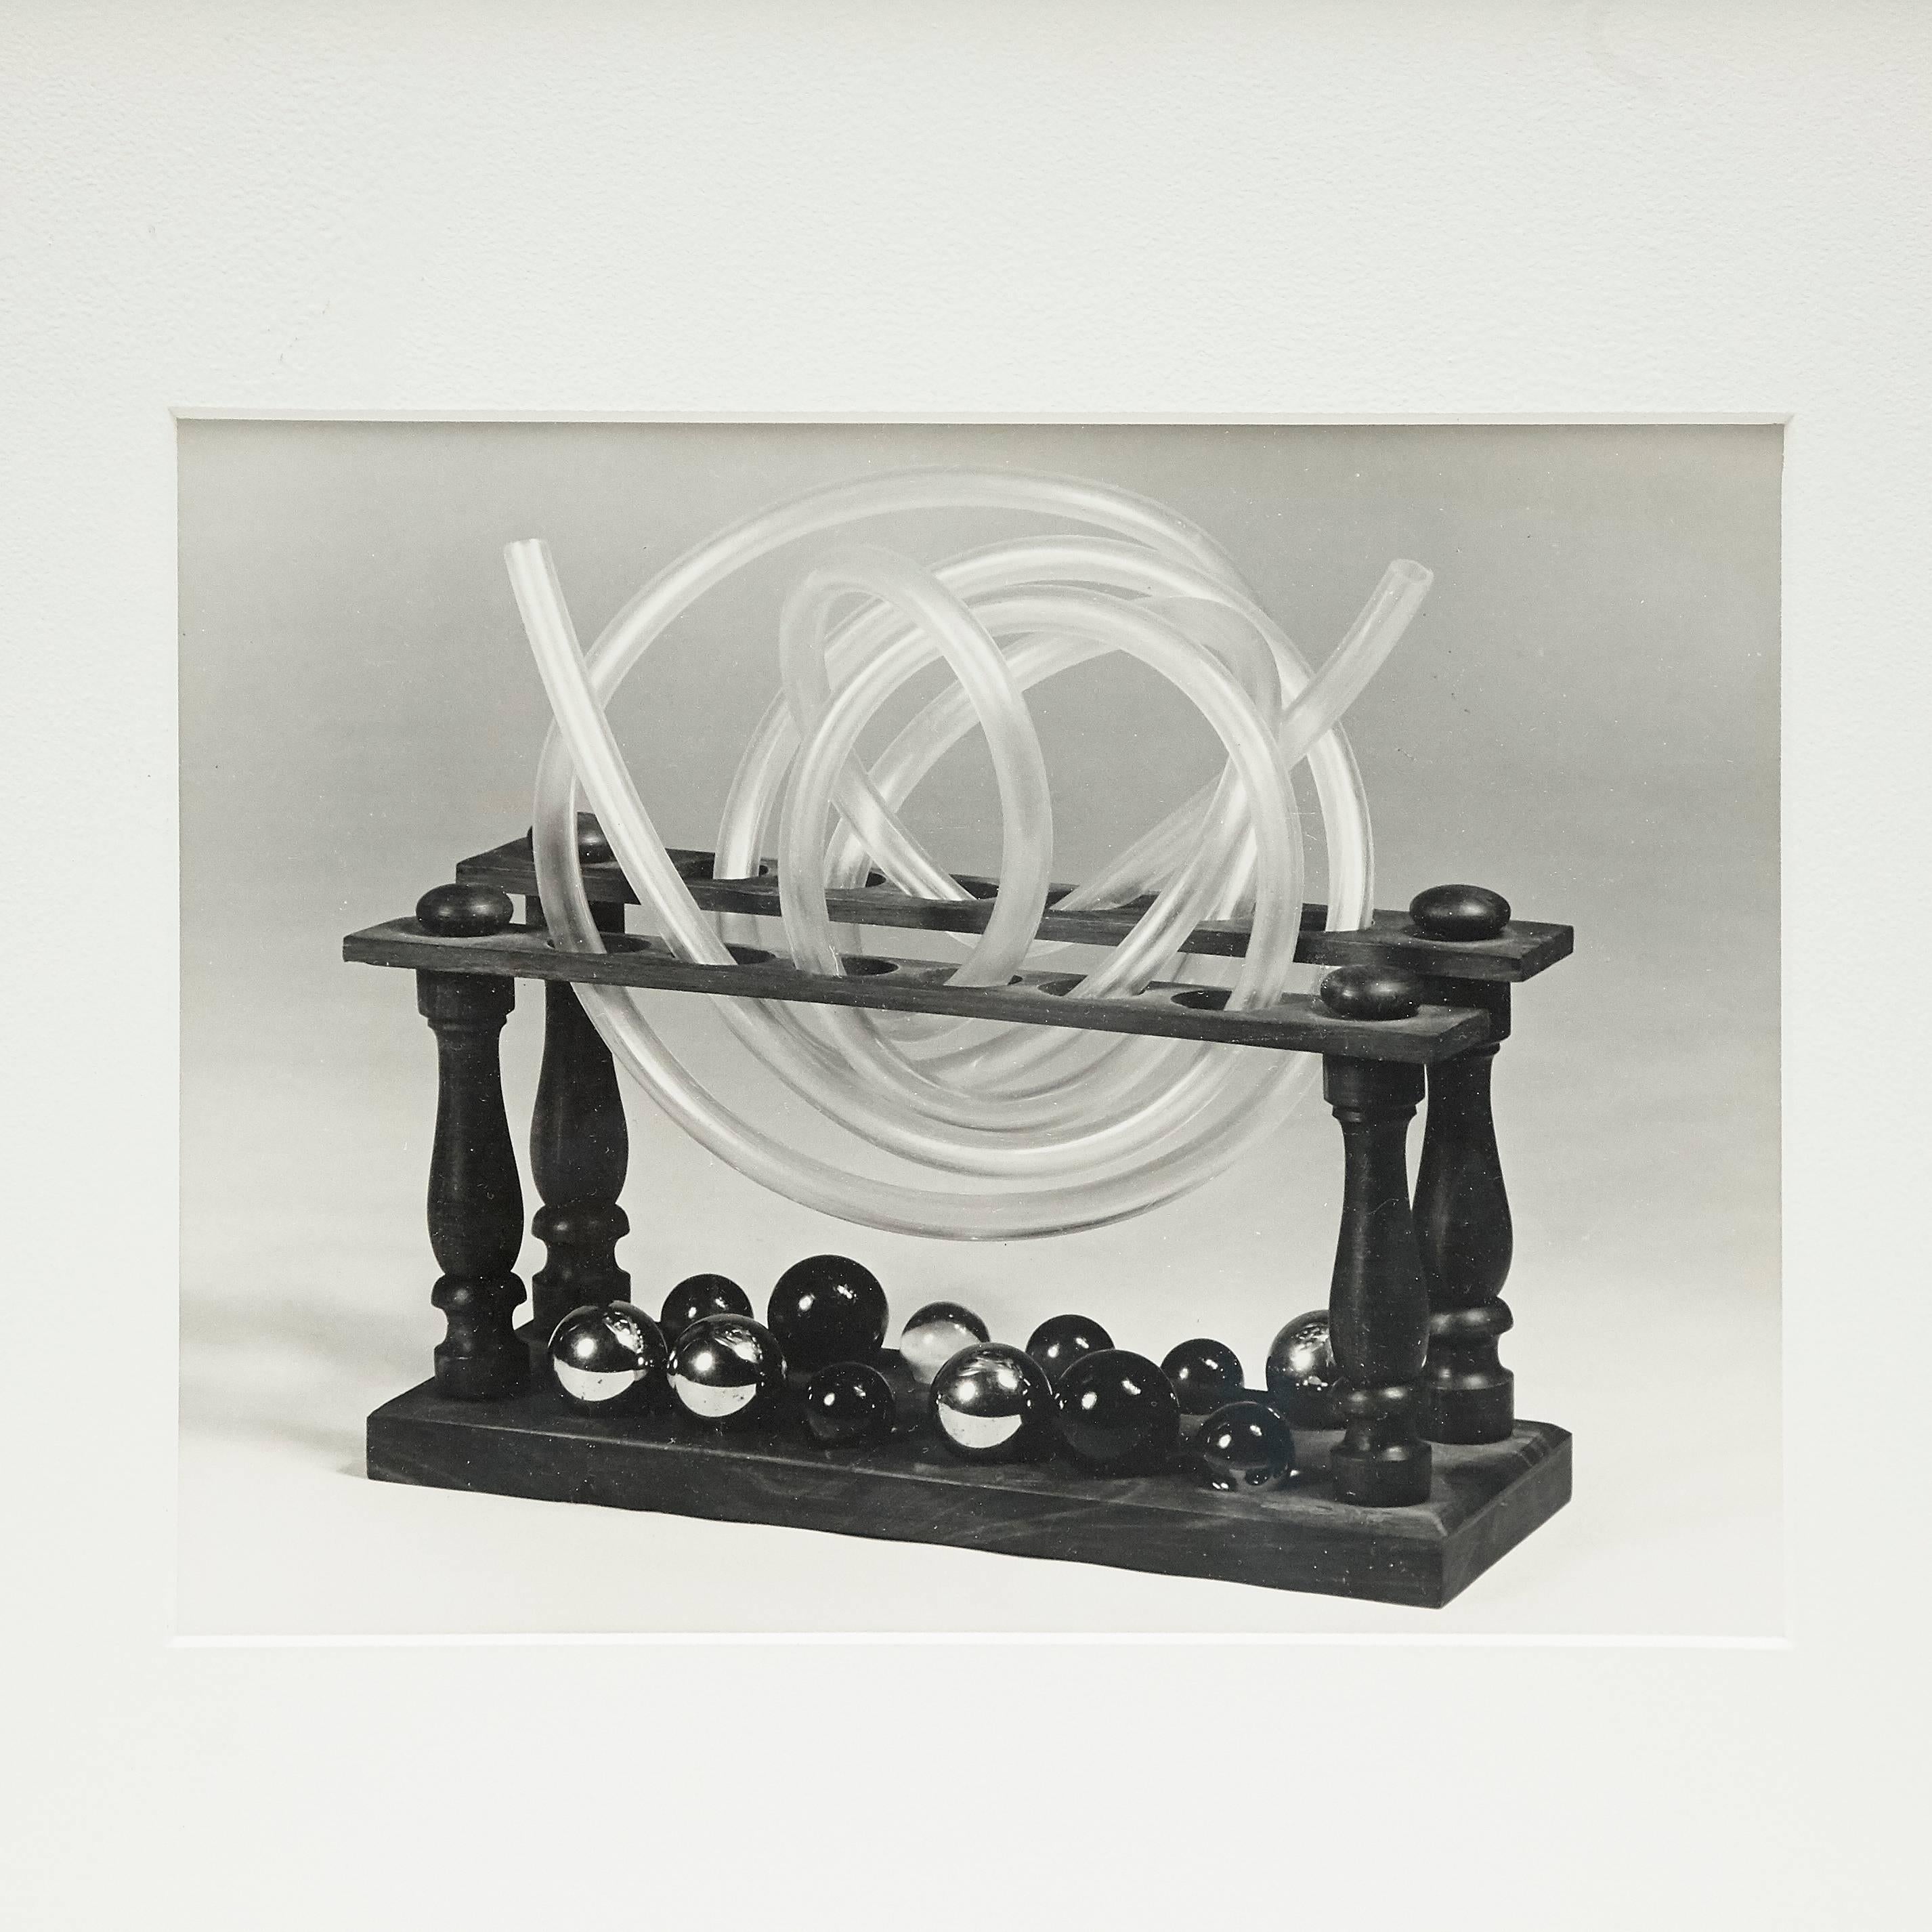 French Man Ray Archive Photography of Smoking Device